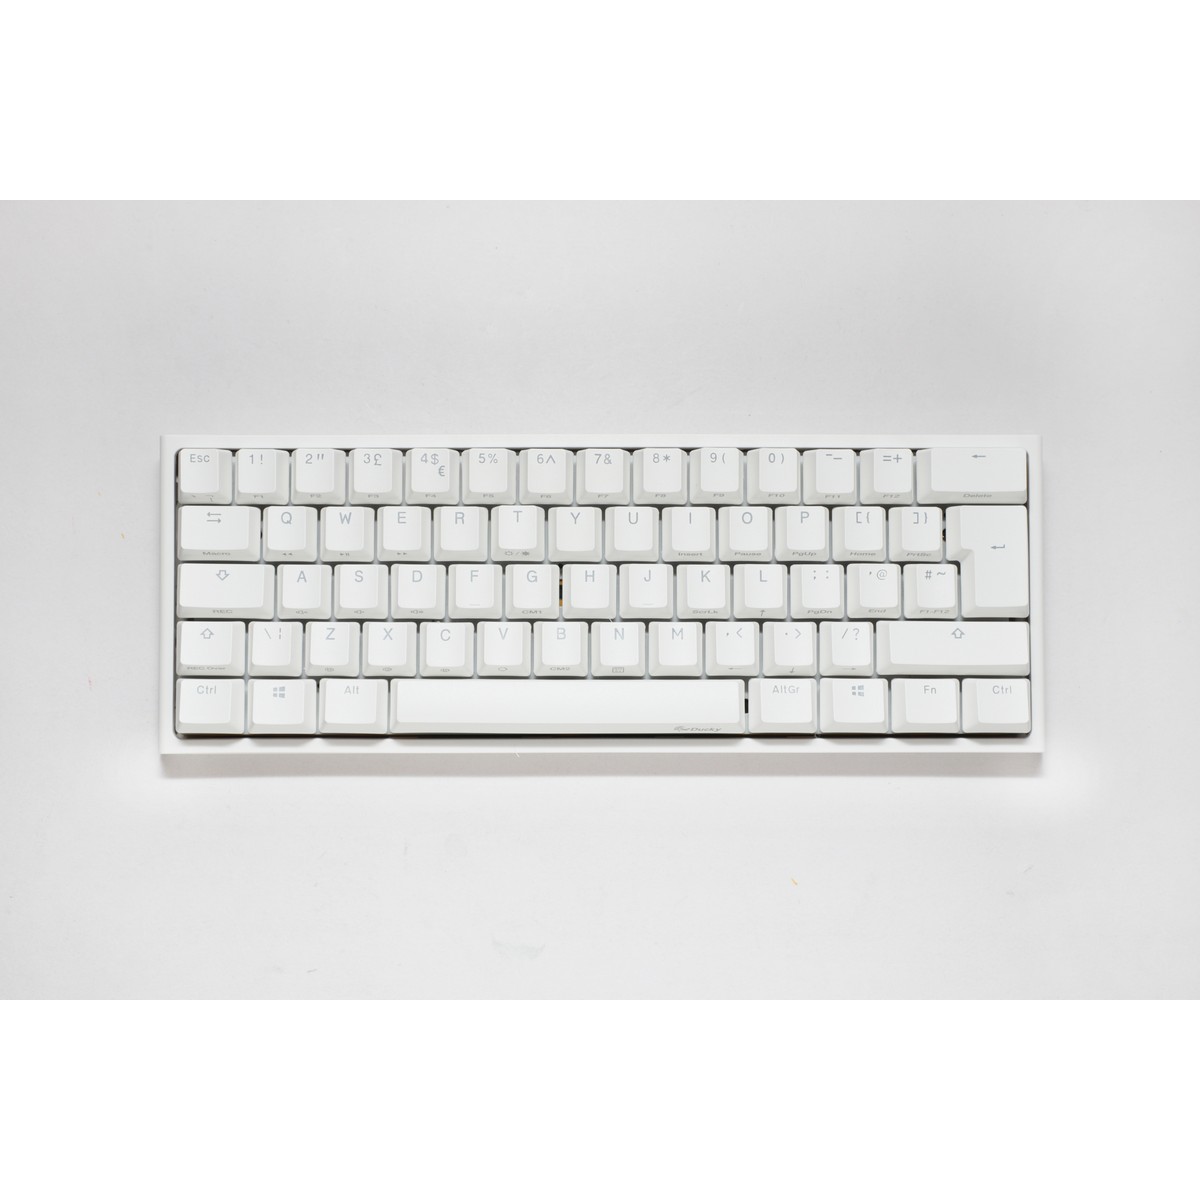 Ducky - Ducky One 2 Pro Mini 60% Mechanical Gaming Keyboard MX Cherry Silver Switch White Frame - UK Layout